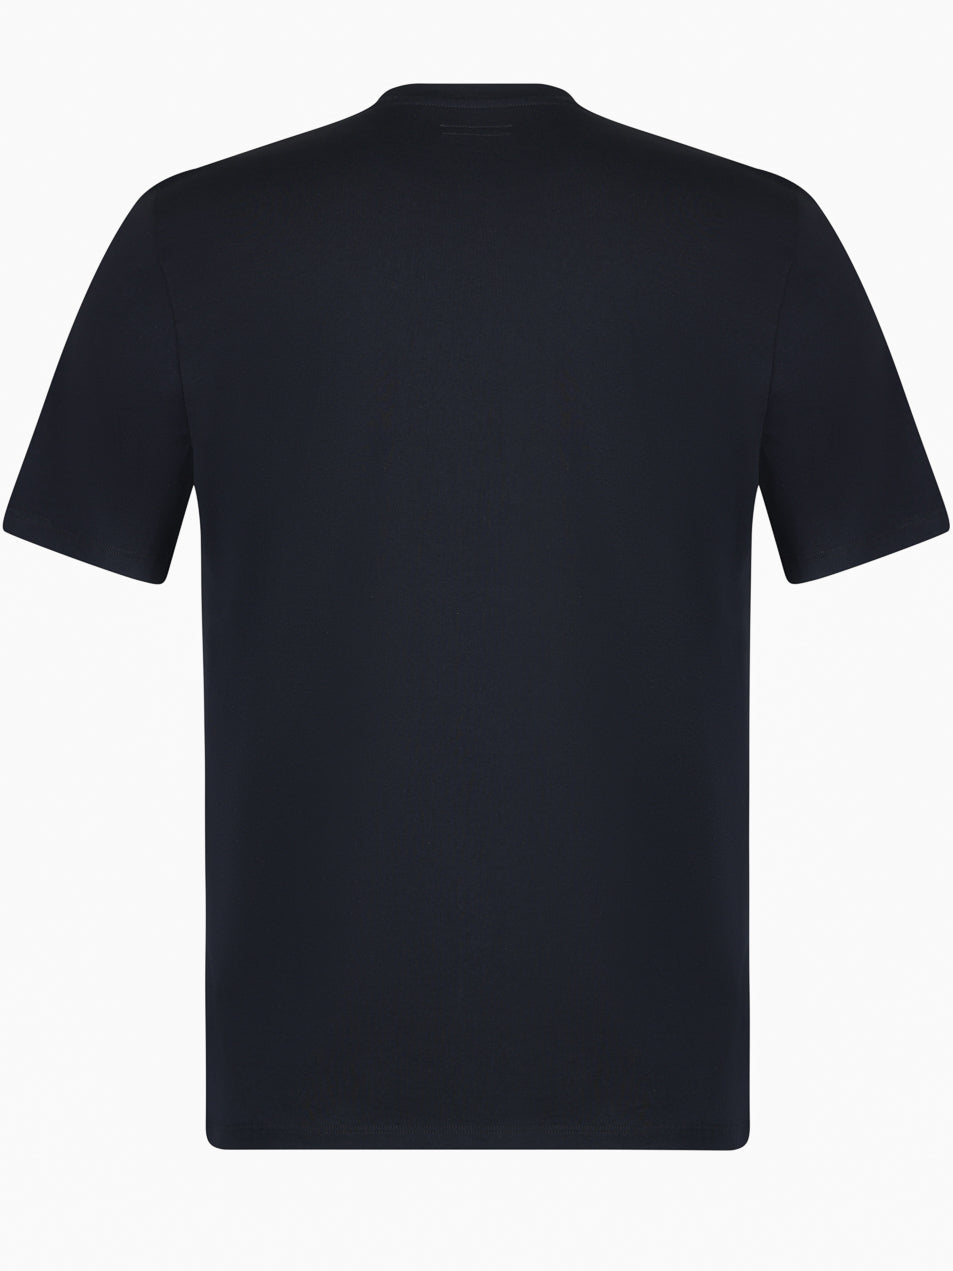 Load image into Gallery viewer, Jacob Cohen Signature Box Tee Black
